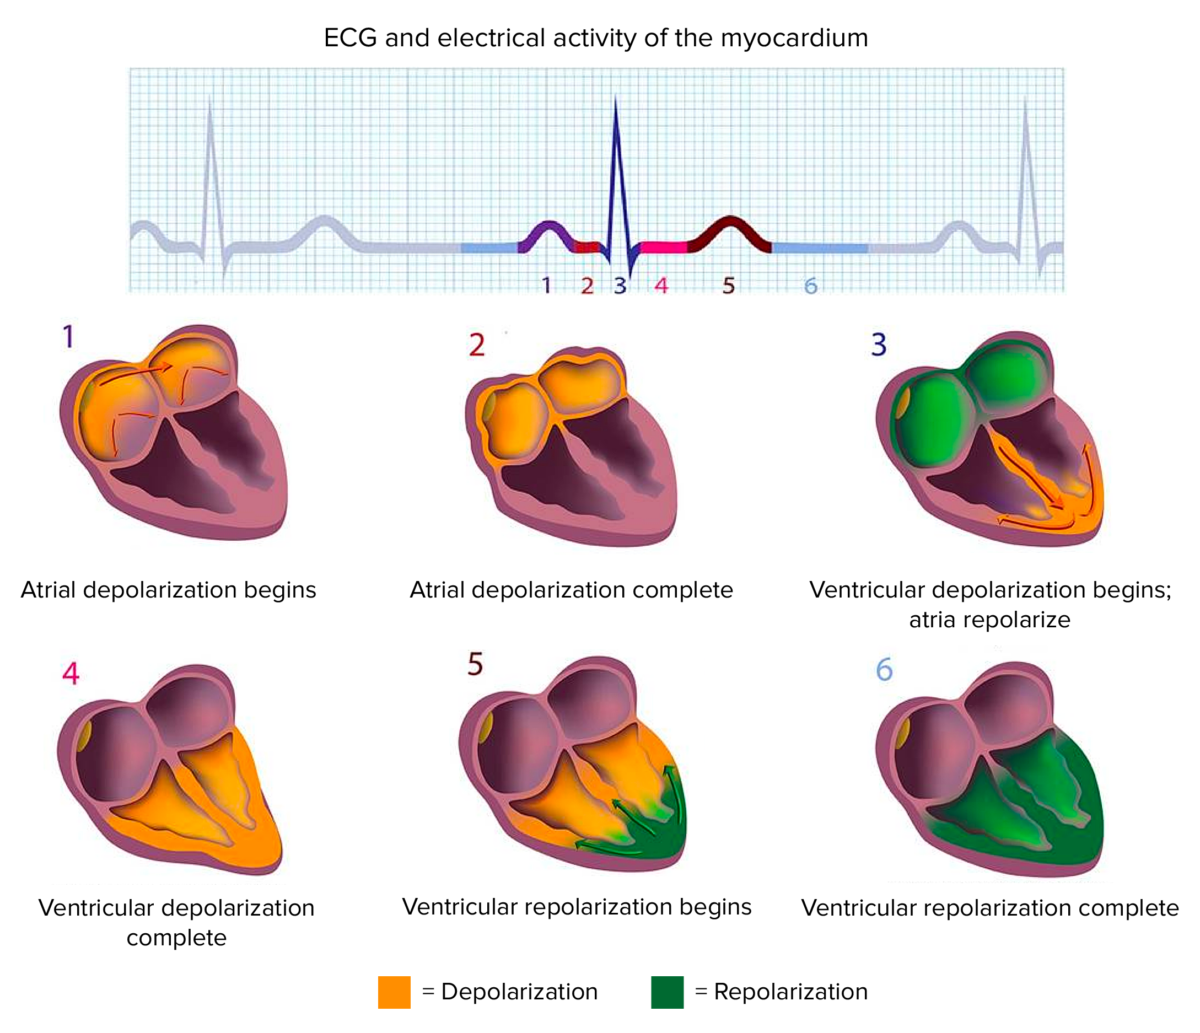 Electrocardiogram and electrical activity of the myocardium